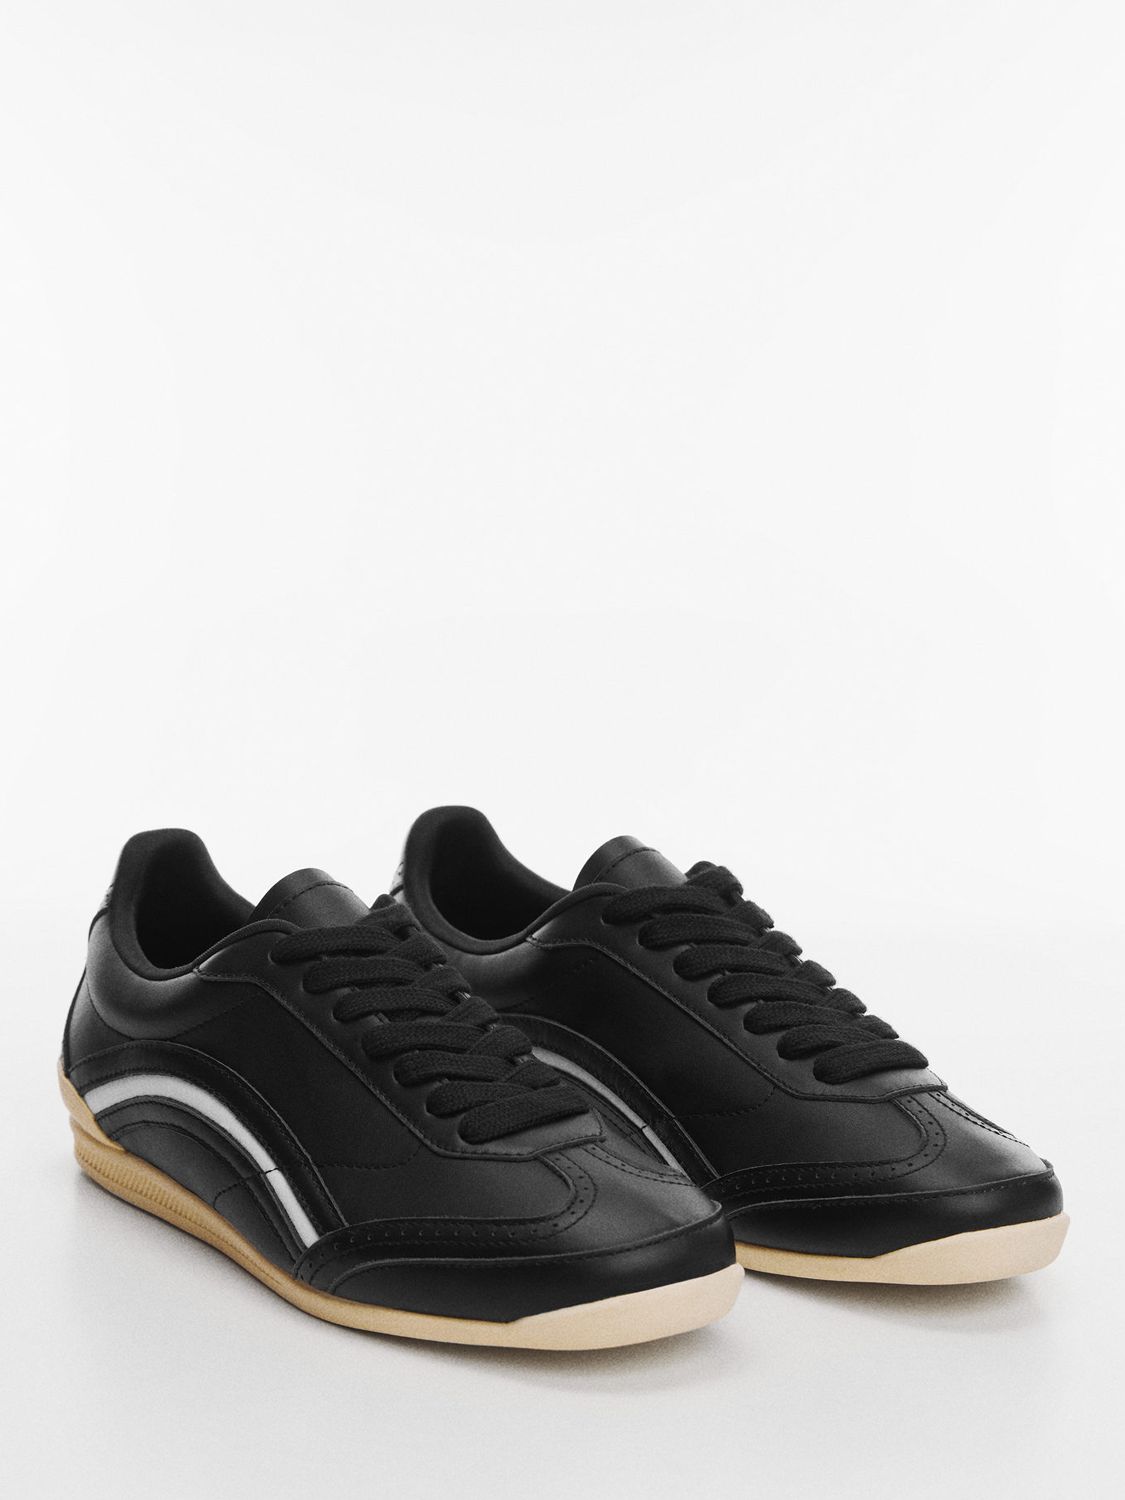 Mango Meyer Lace-Up Leather Trainers, Black at John Lewis & Partners